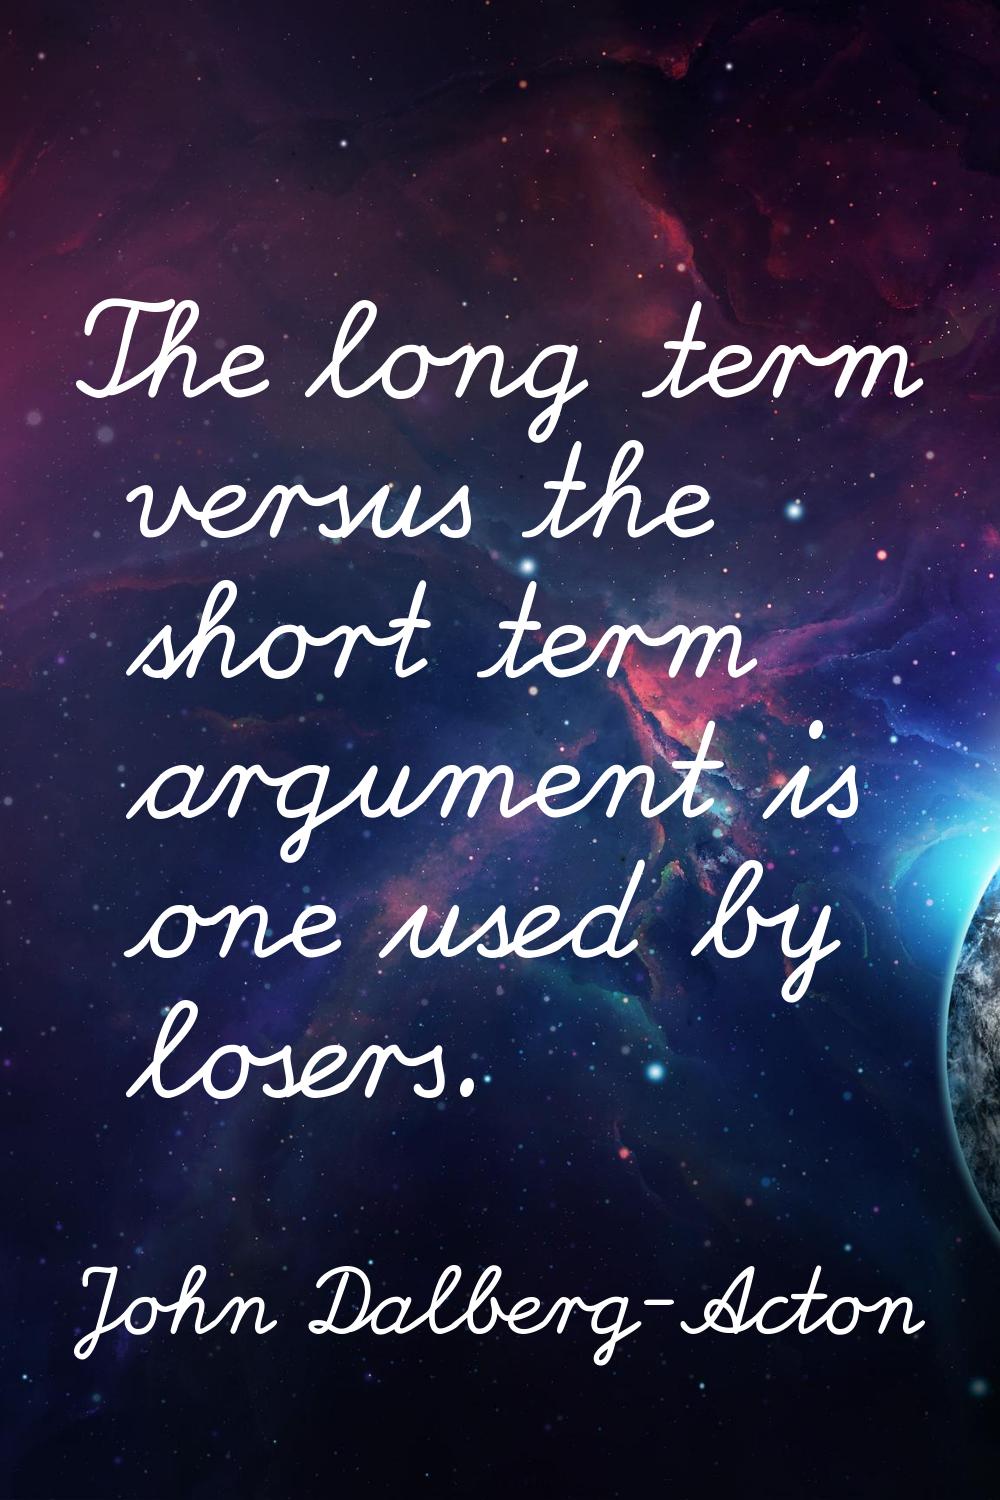 The long term versus the short term argument is one used by losers.